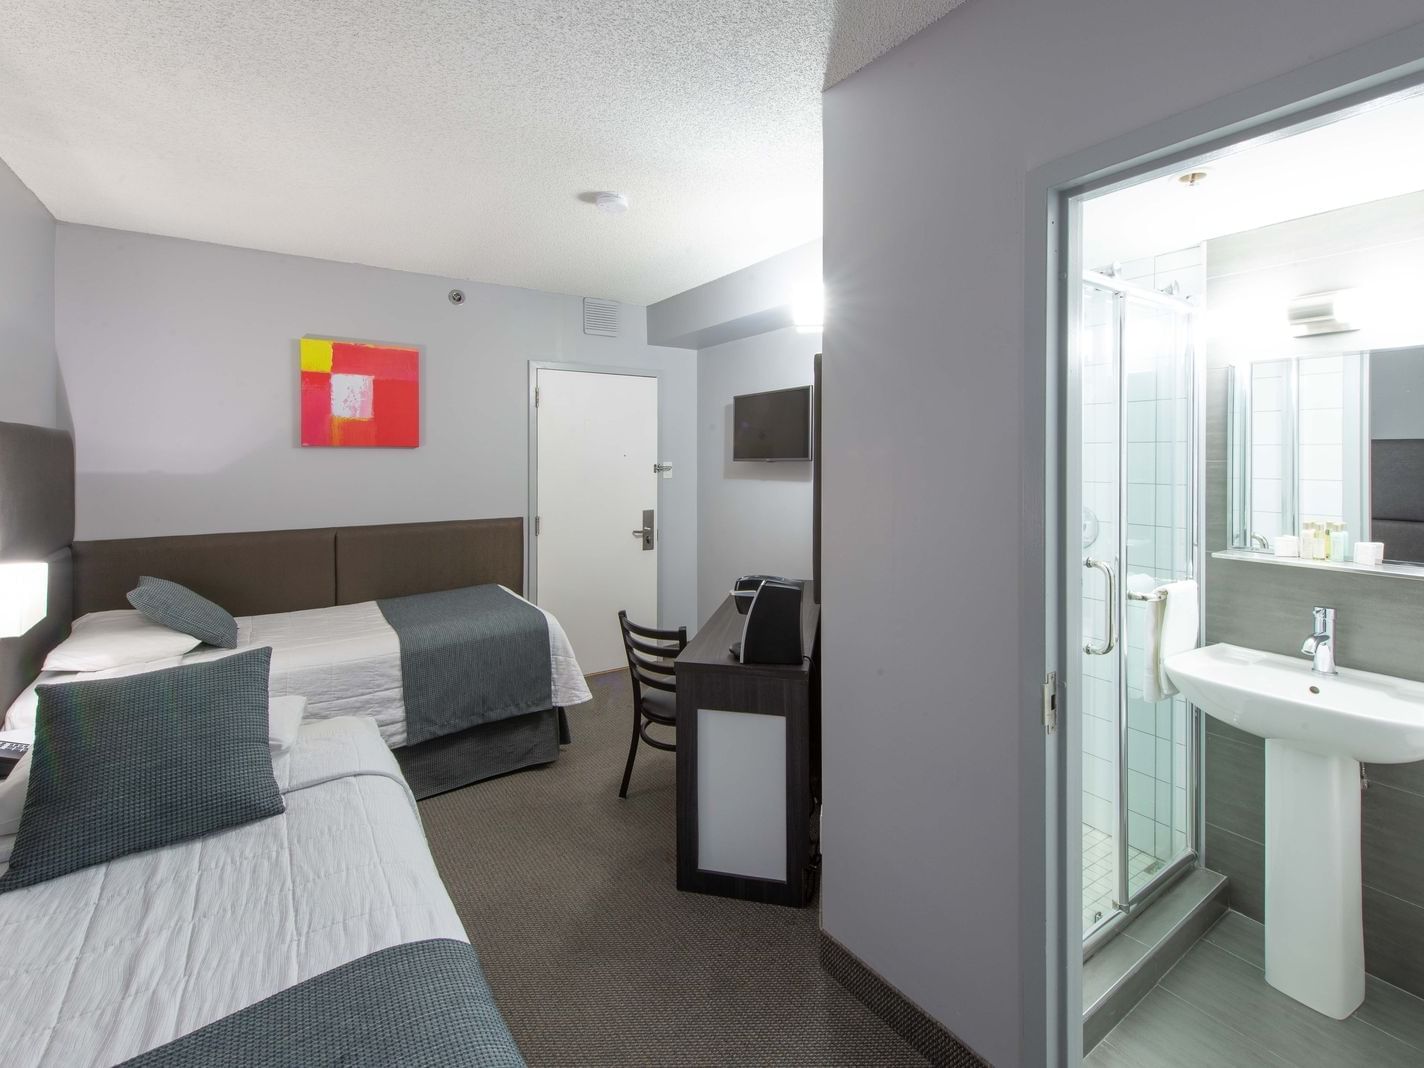 2 Single beds, TV lounge area and bathroom in Twin Room at Travelodge Montreal Centre